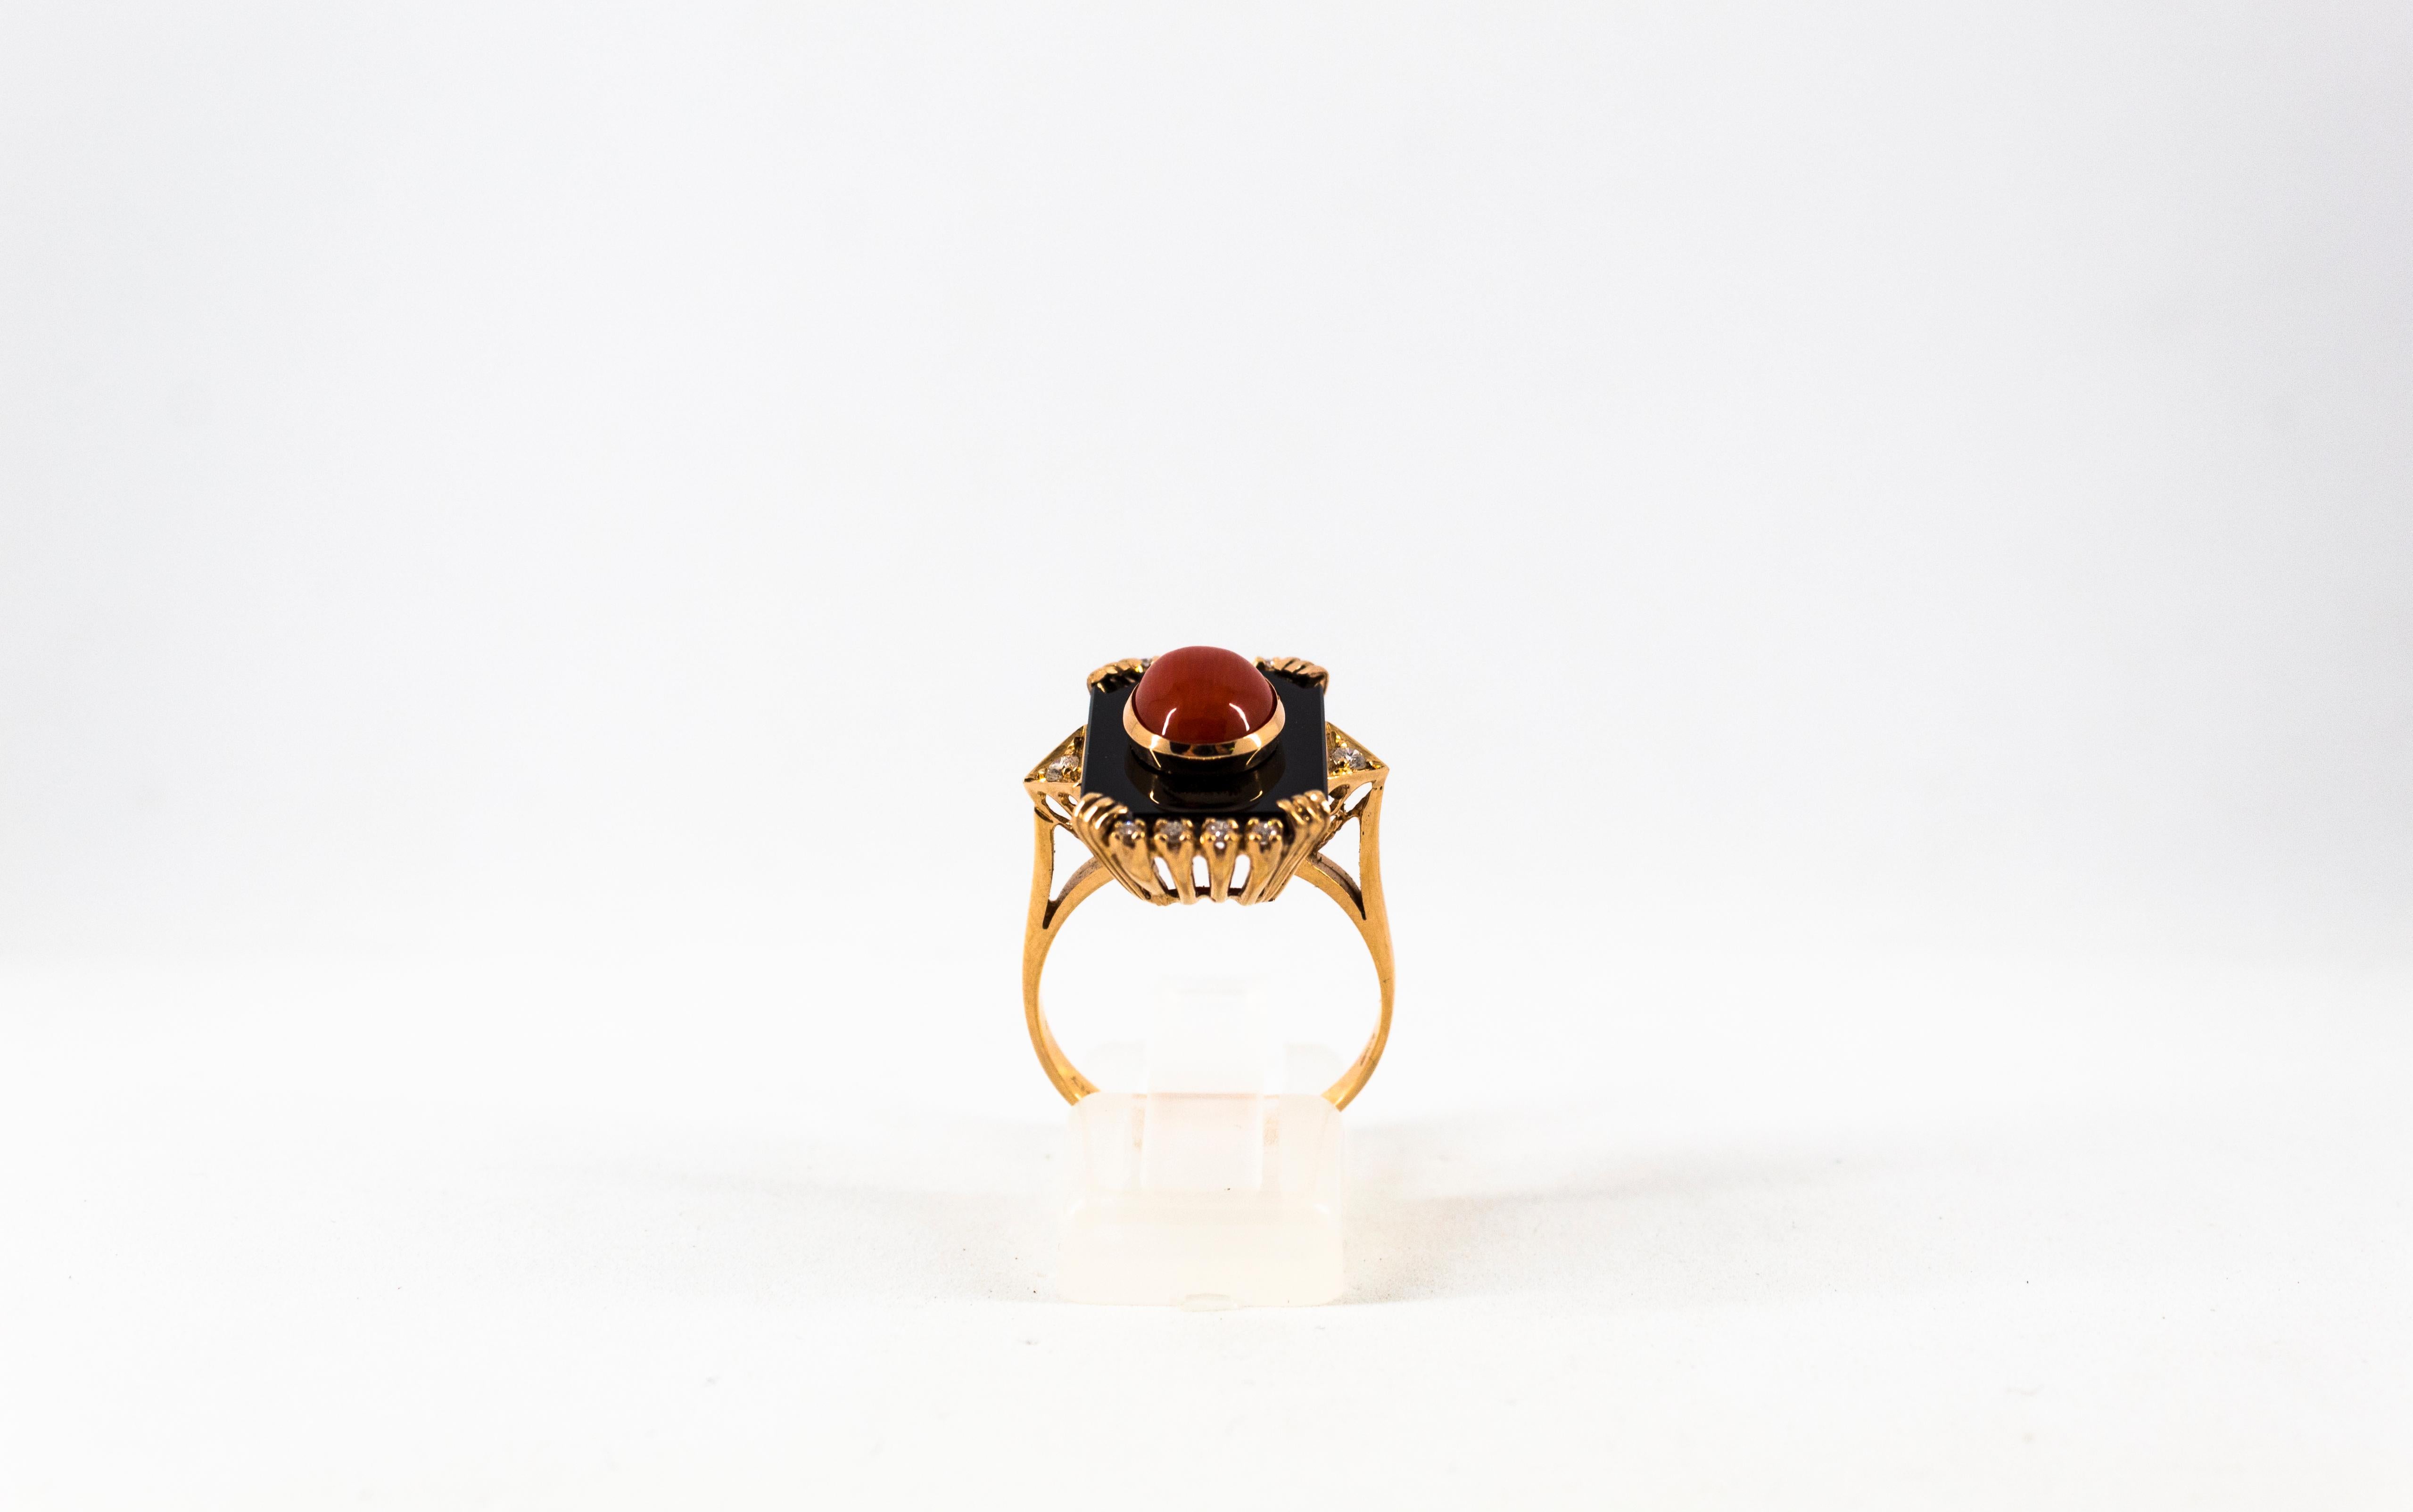 This Ring is made of 14K Yellow Gold.
This Ring has 0.18 Carats of White Diamonds.
This Ring has Red Mediterranean (Sardinia, Italy) Coral.
This Ring has also Onyx.
Size ITA: 16 USA: 7 1/2
This Ring is available also with a central 2.10 Carats Ruby